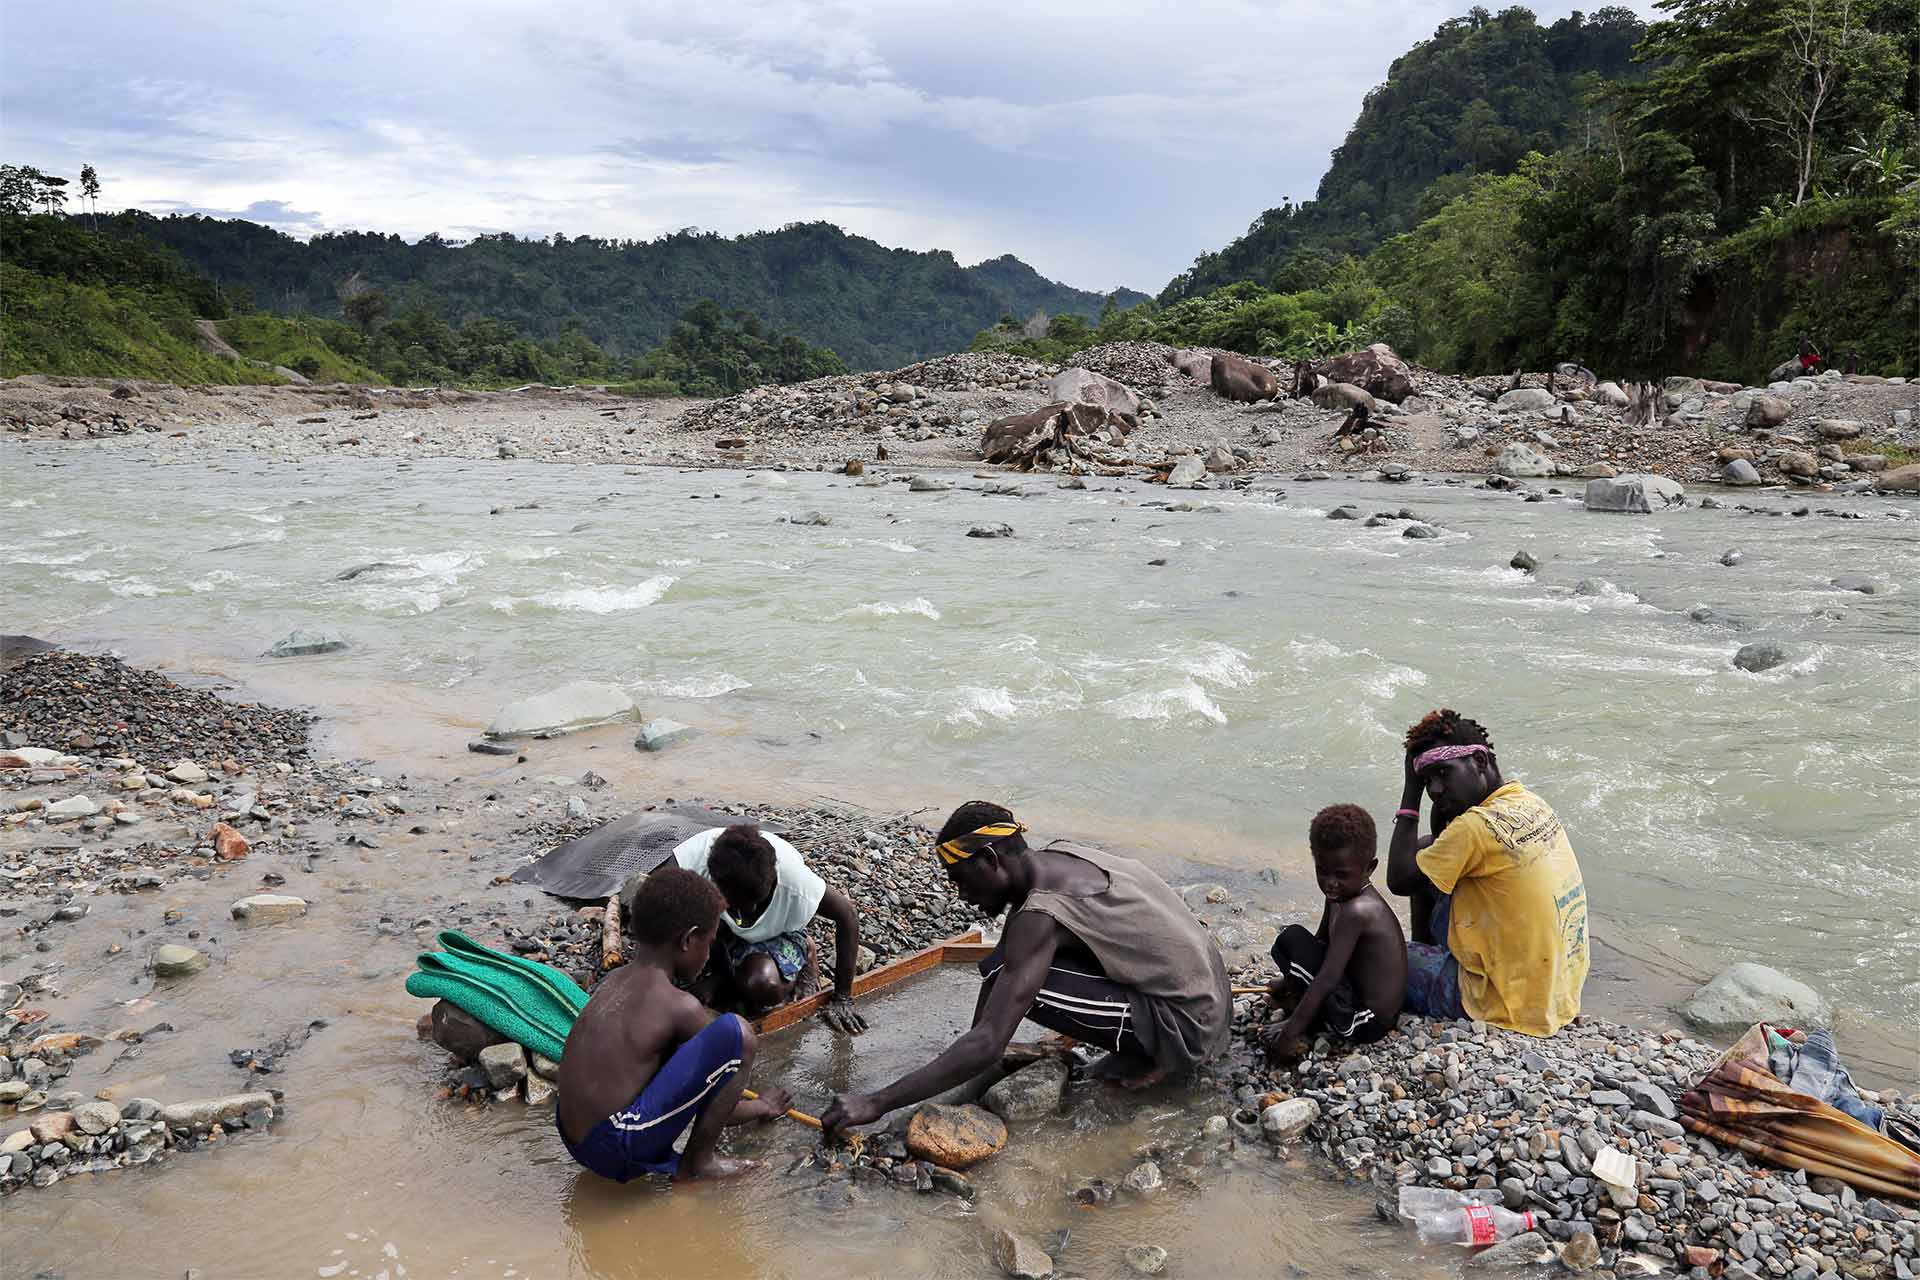 A family panning for gold in polluted waters